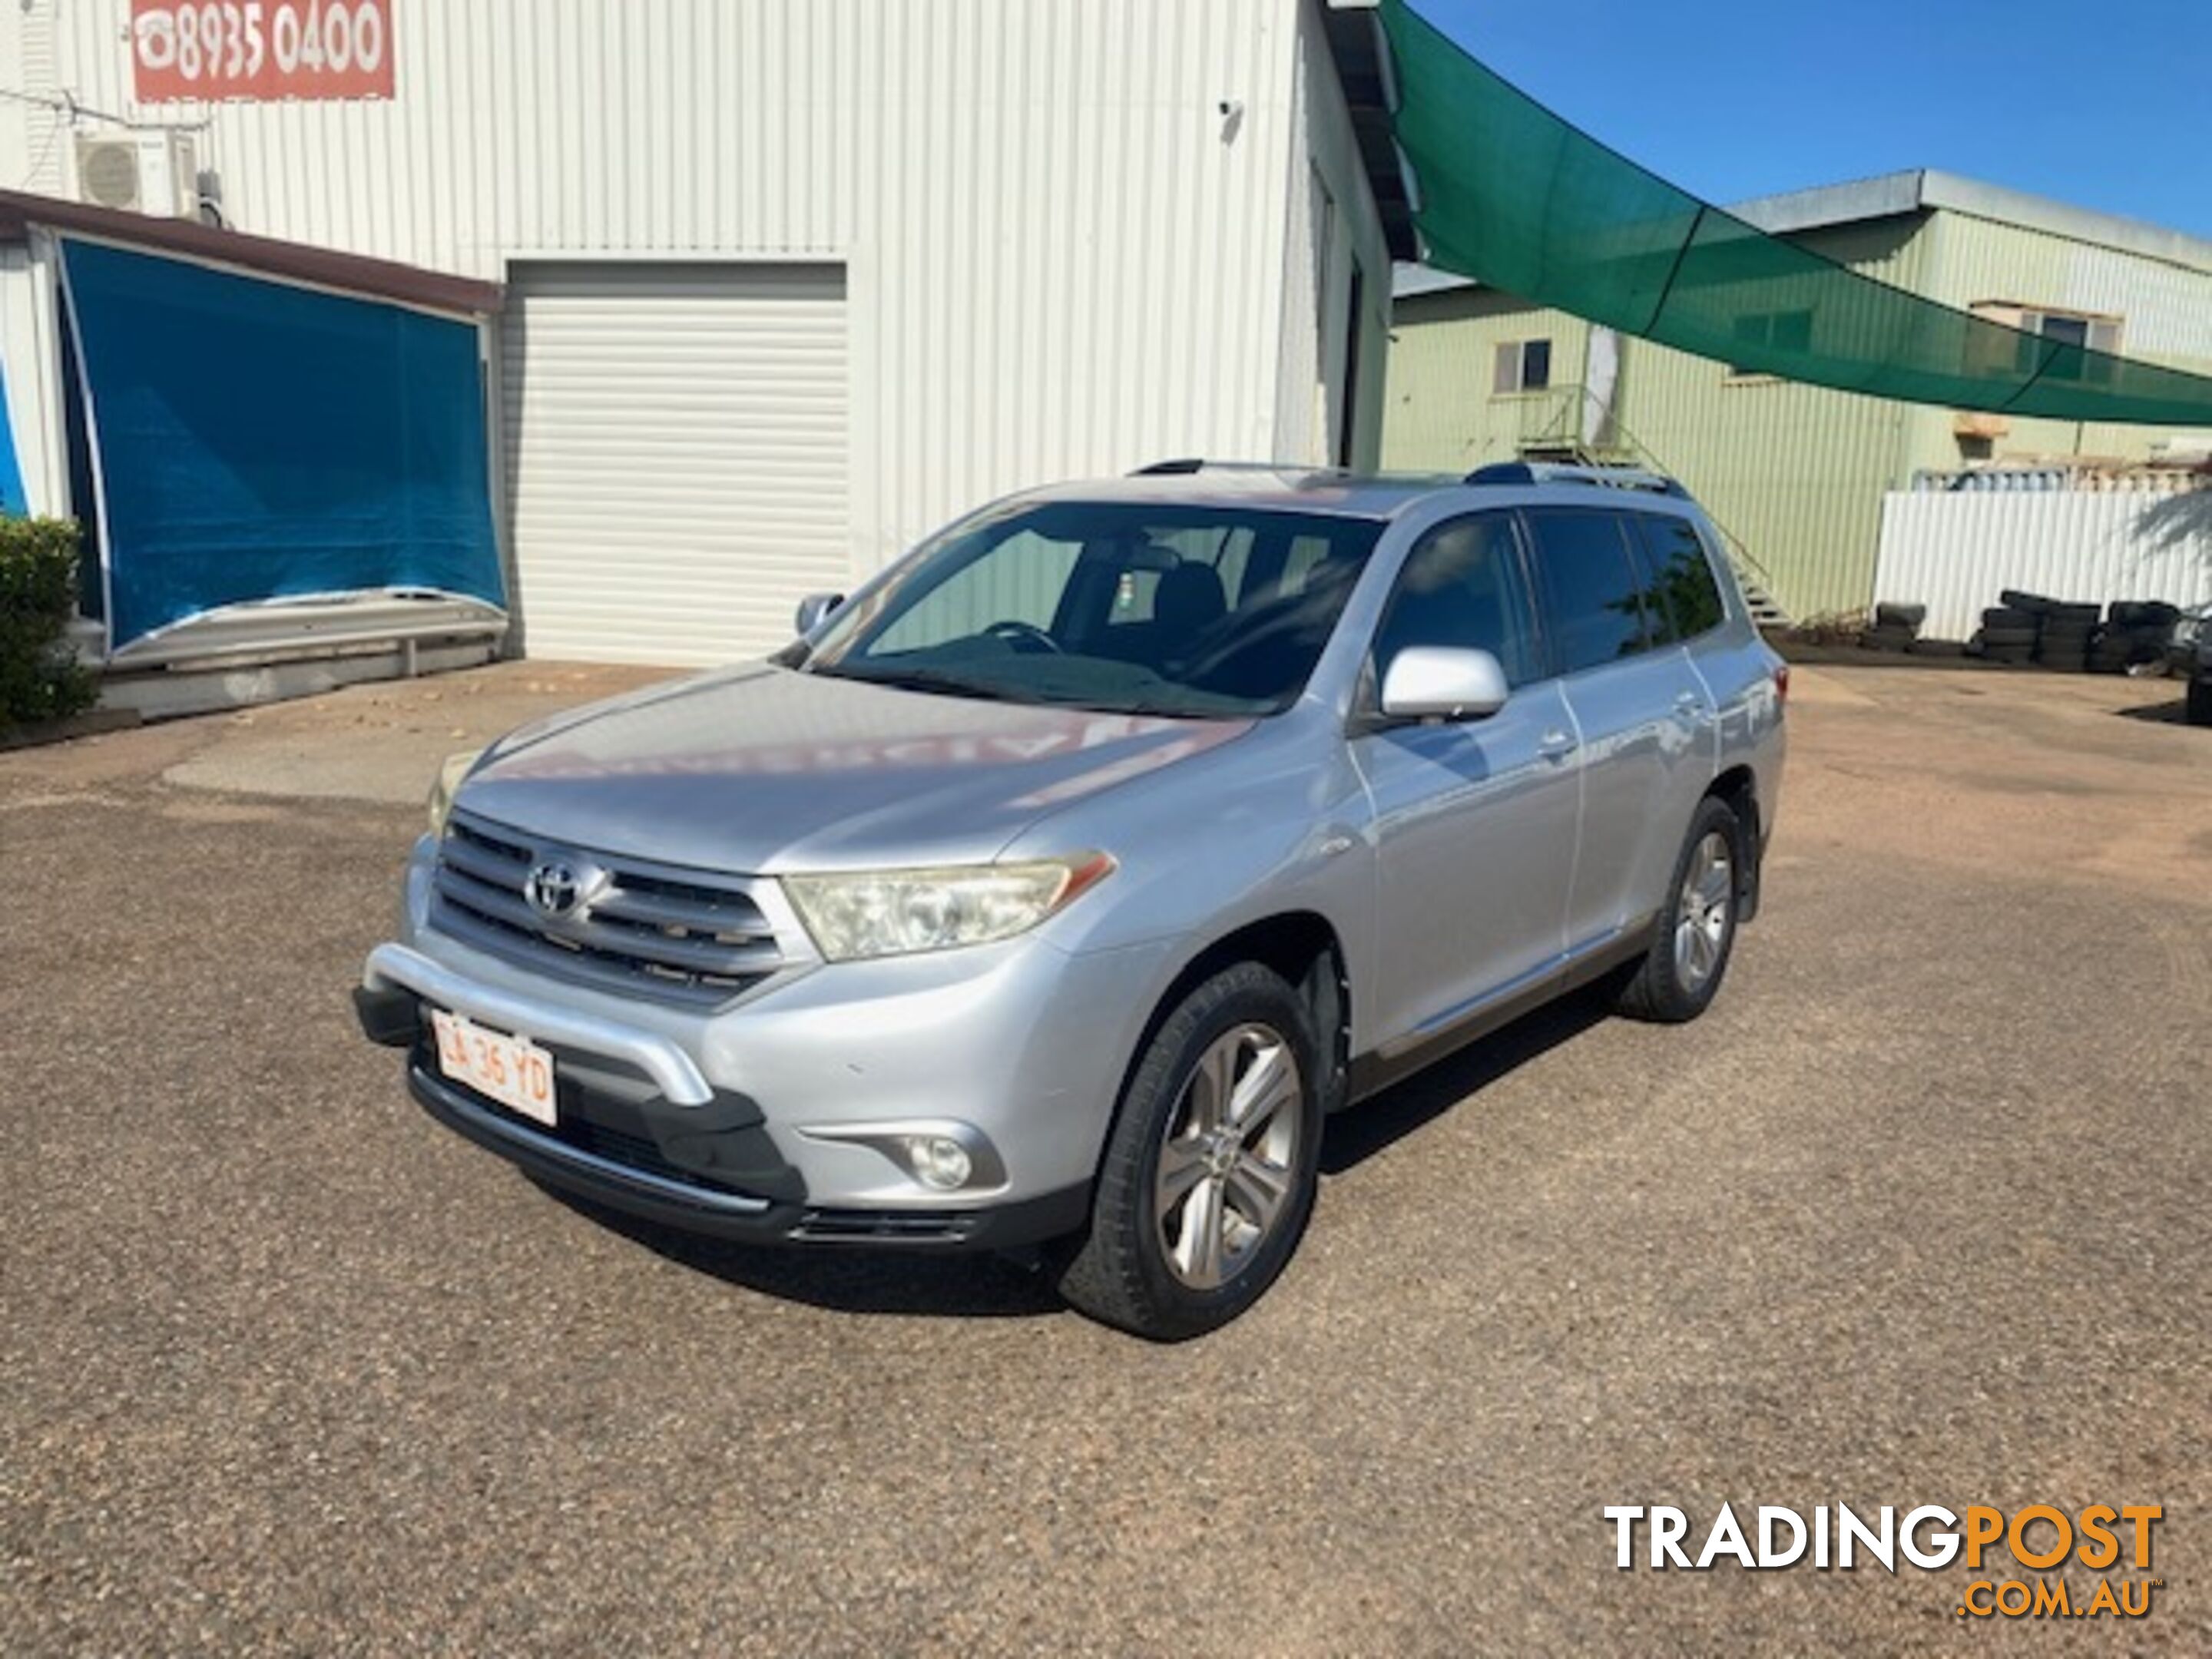 2012 Toyota Kluger KX-S Wagon Automatic